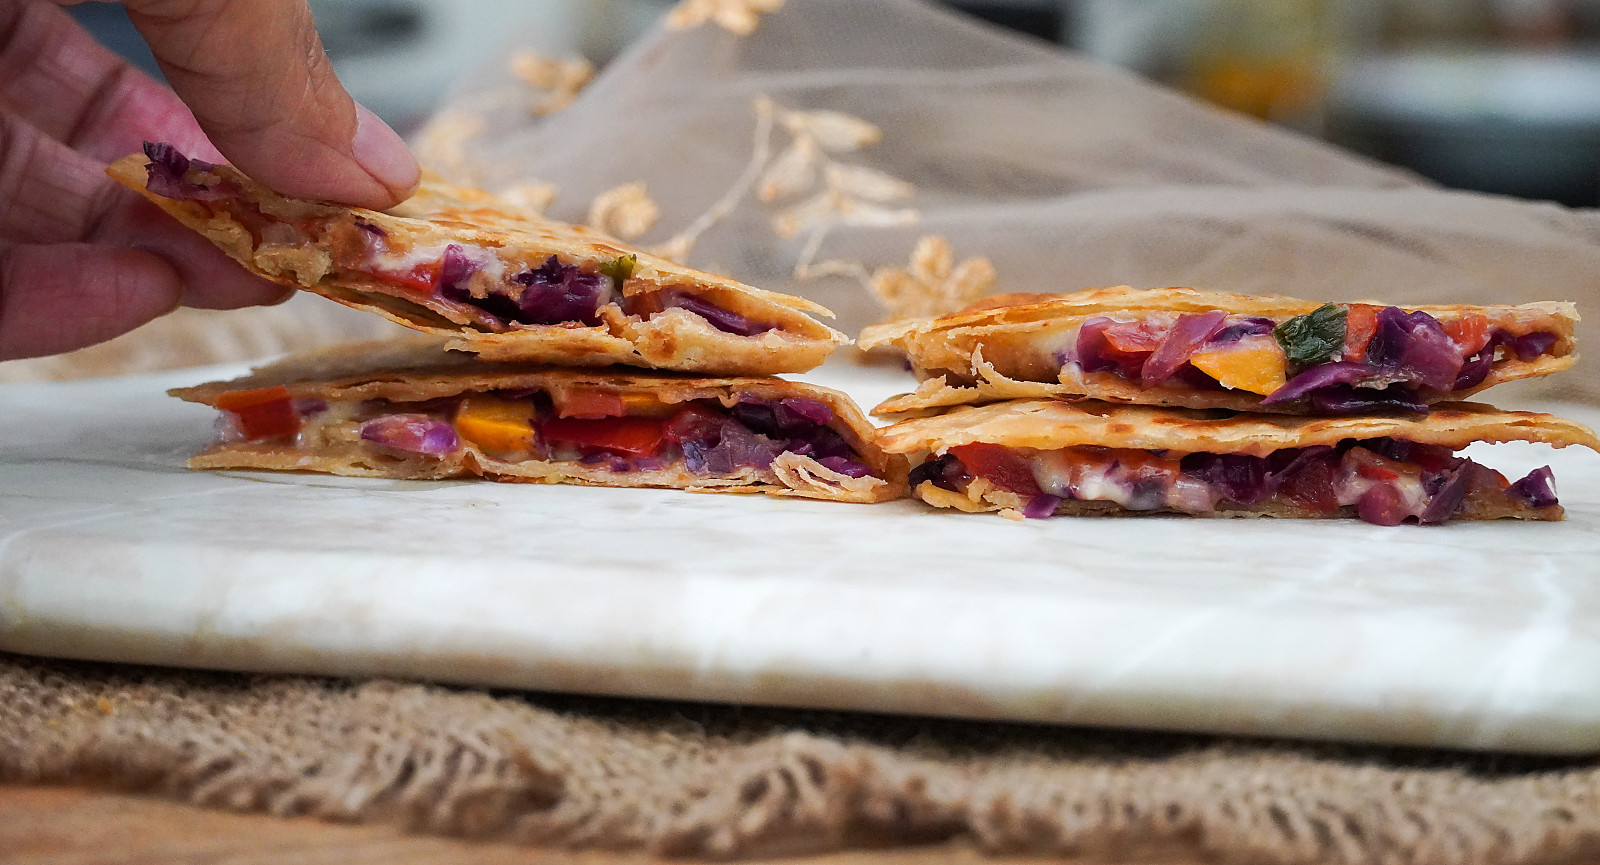 Roasted Vegetable Quesadilla Recipe With Zucchini, Carrots & Red Cabbage